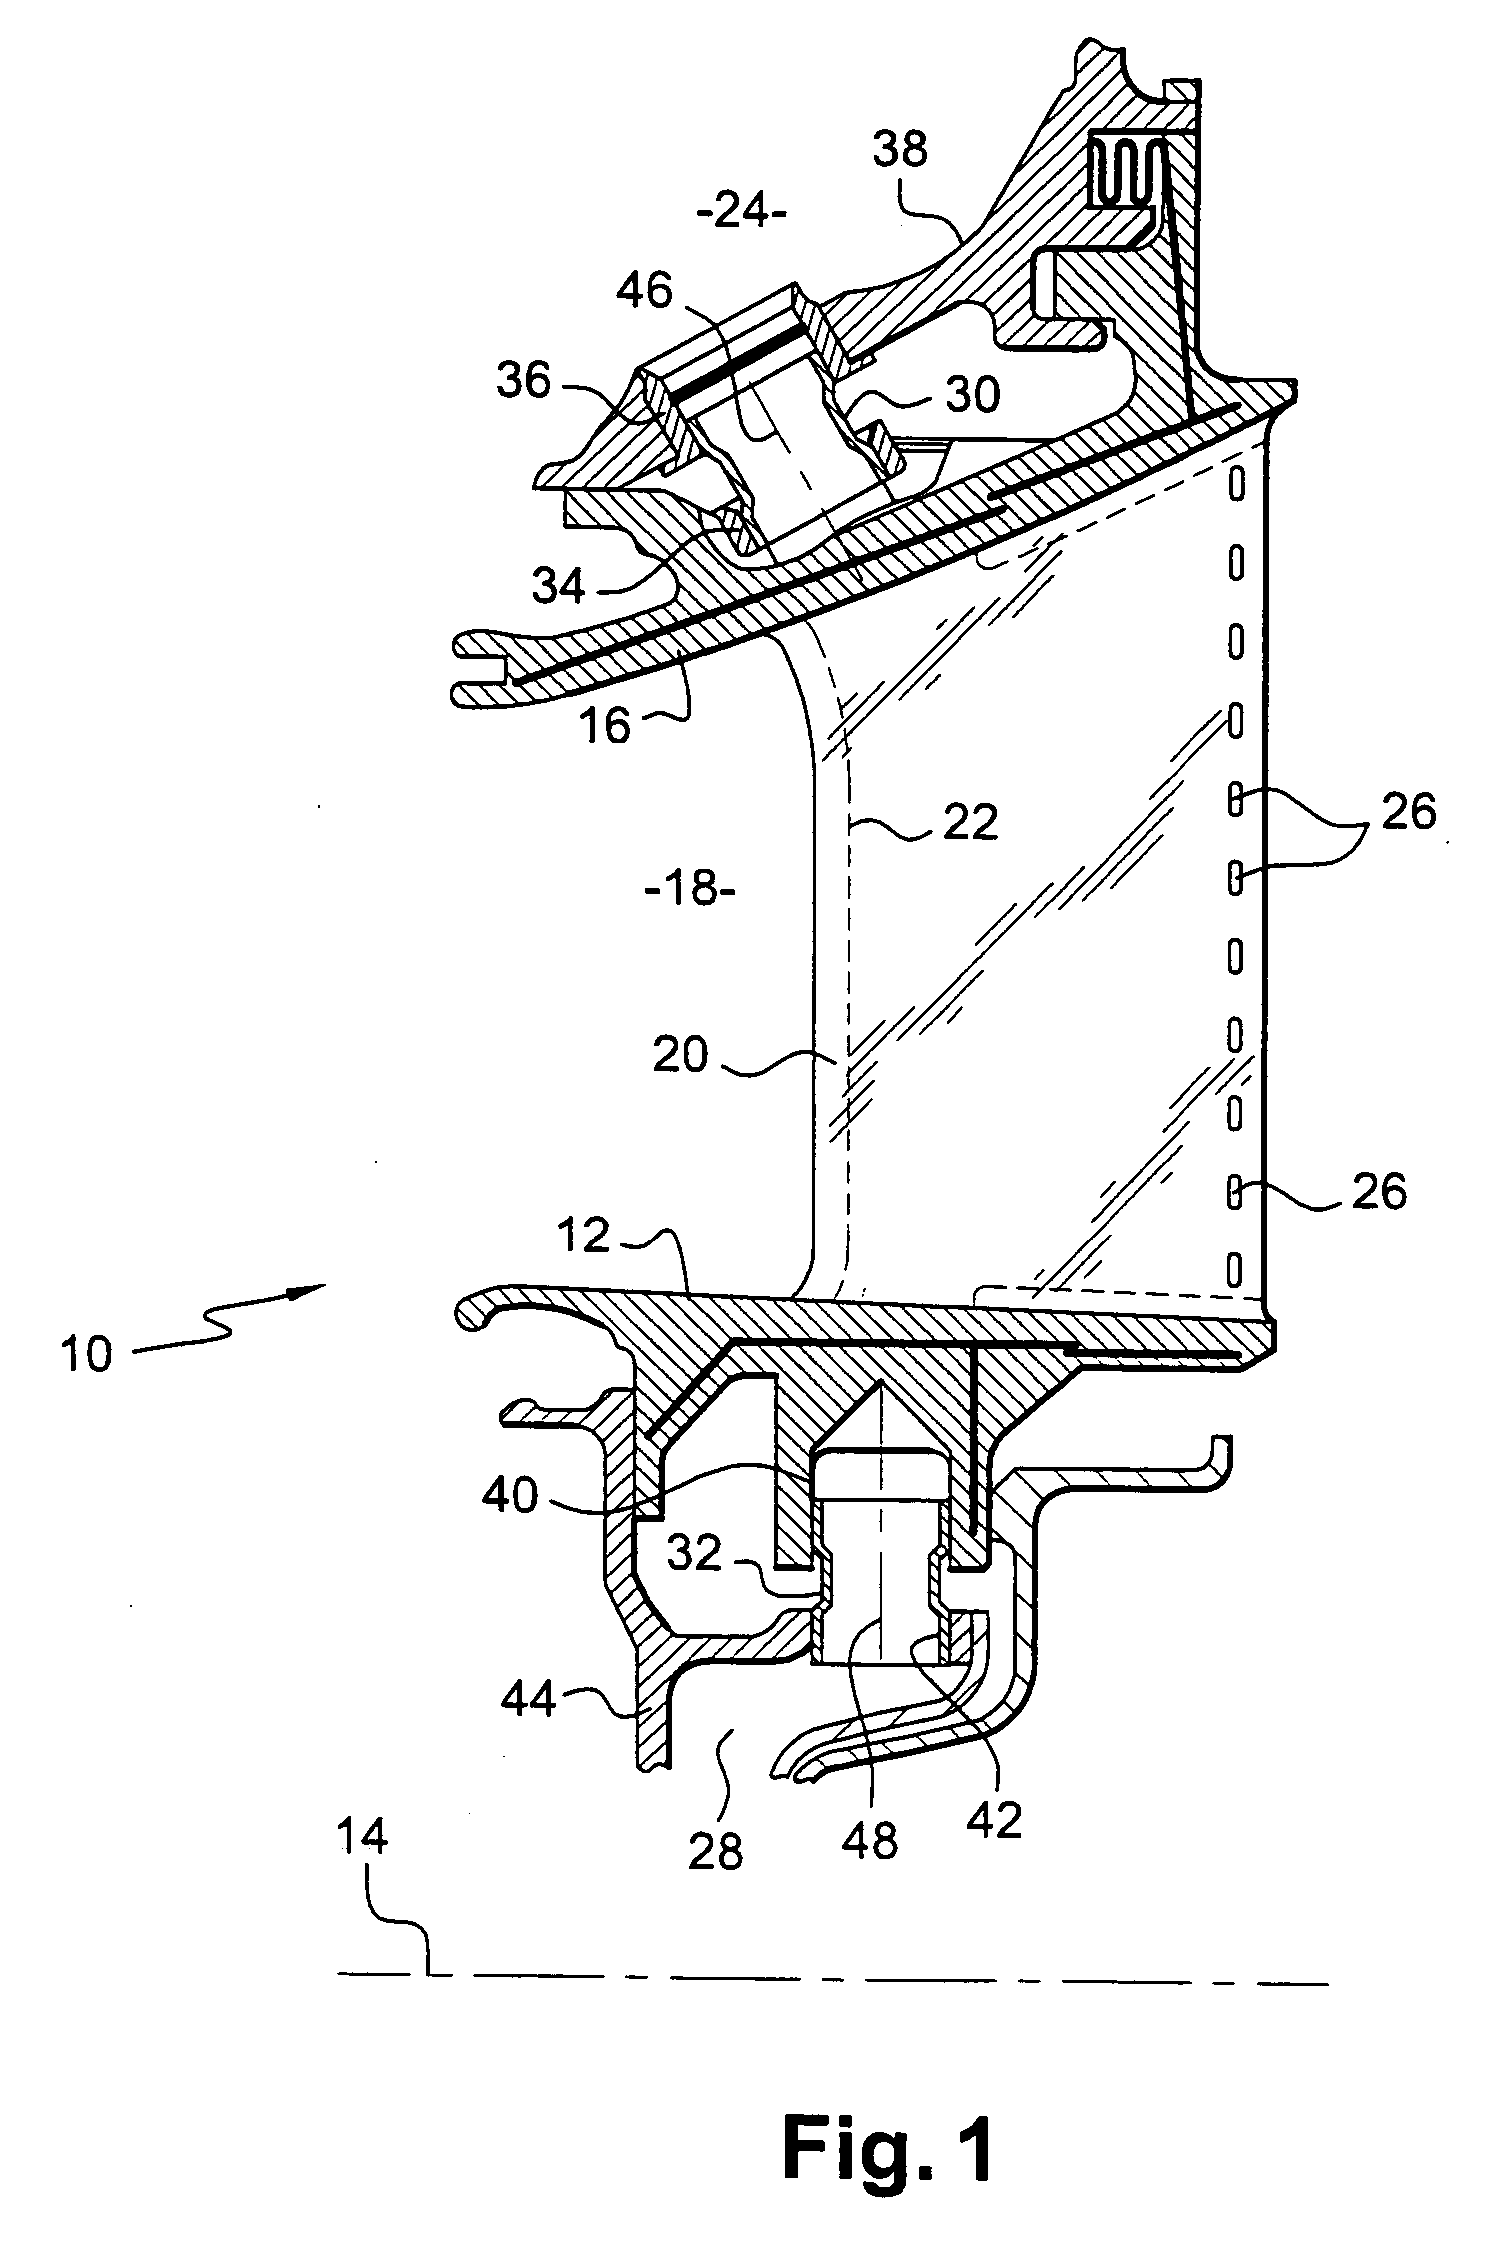 Link device between an enclosure for passing cooling air and a stator nozzle in a turbomachine